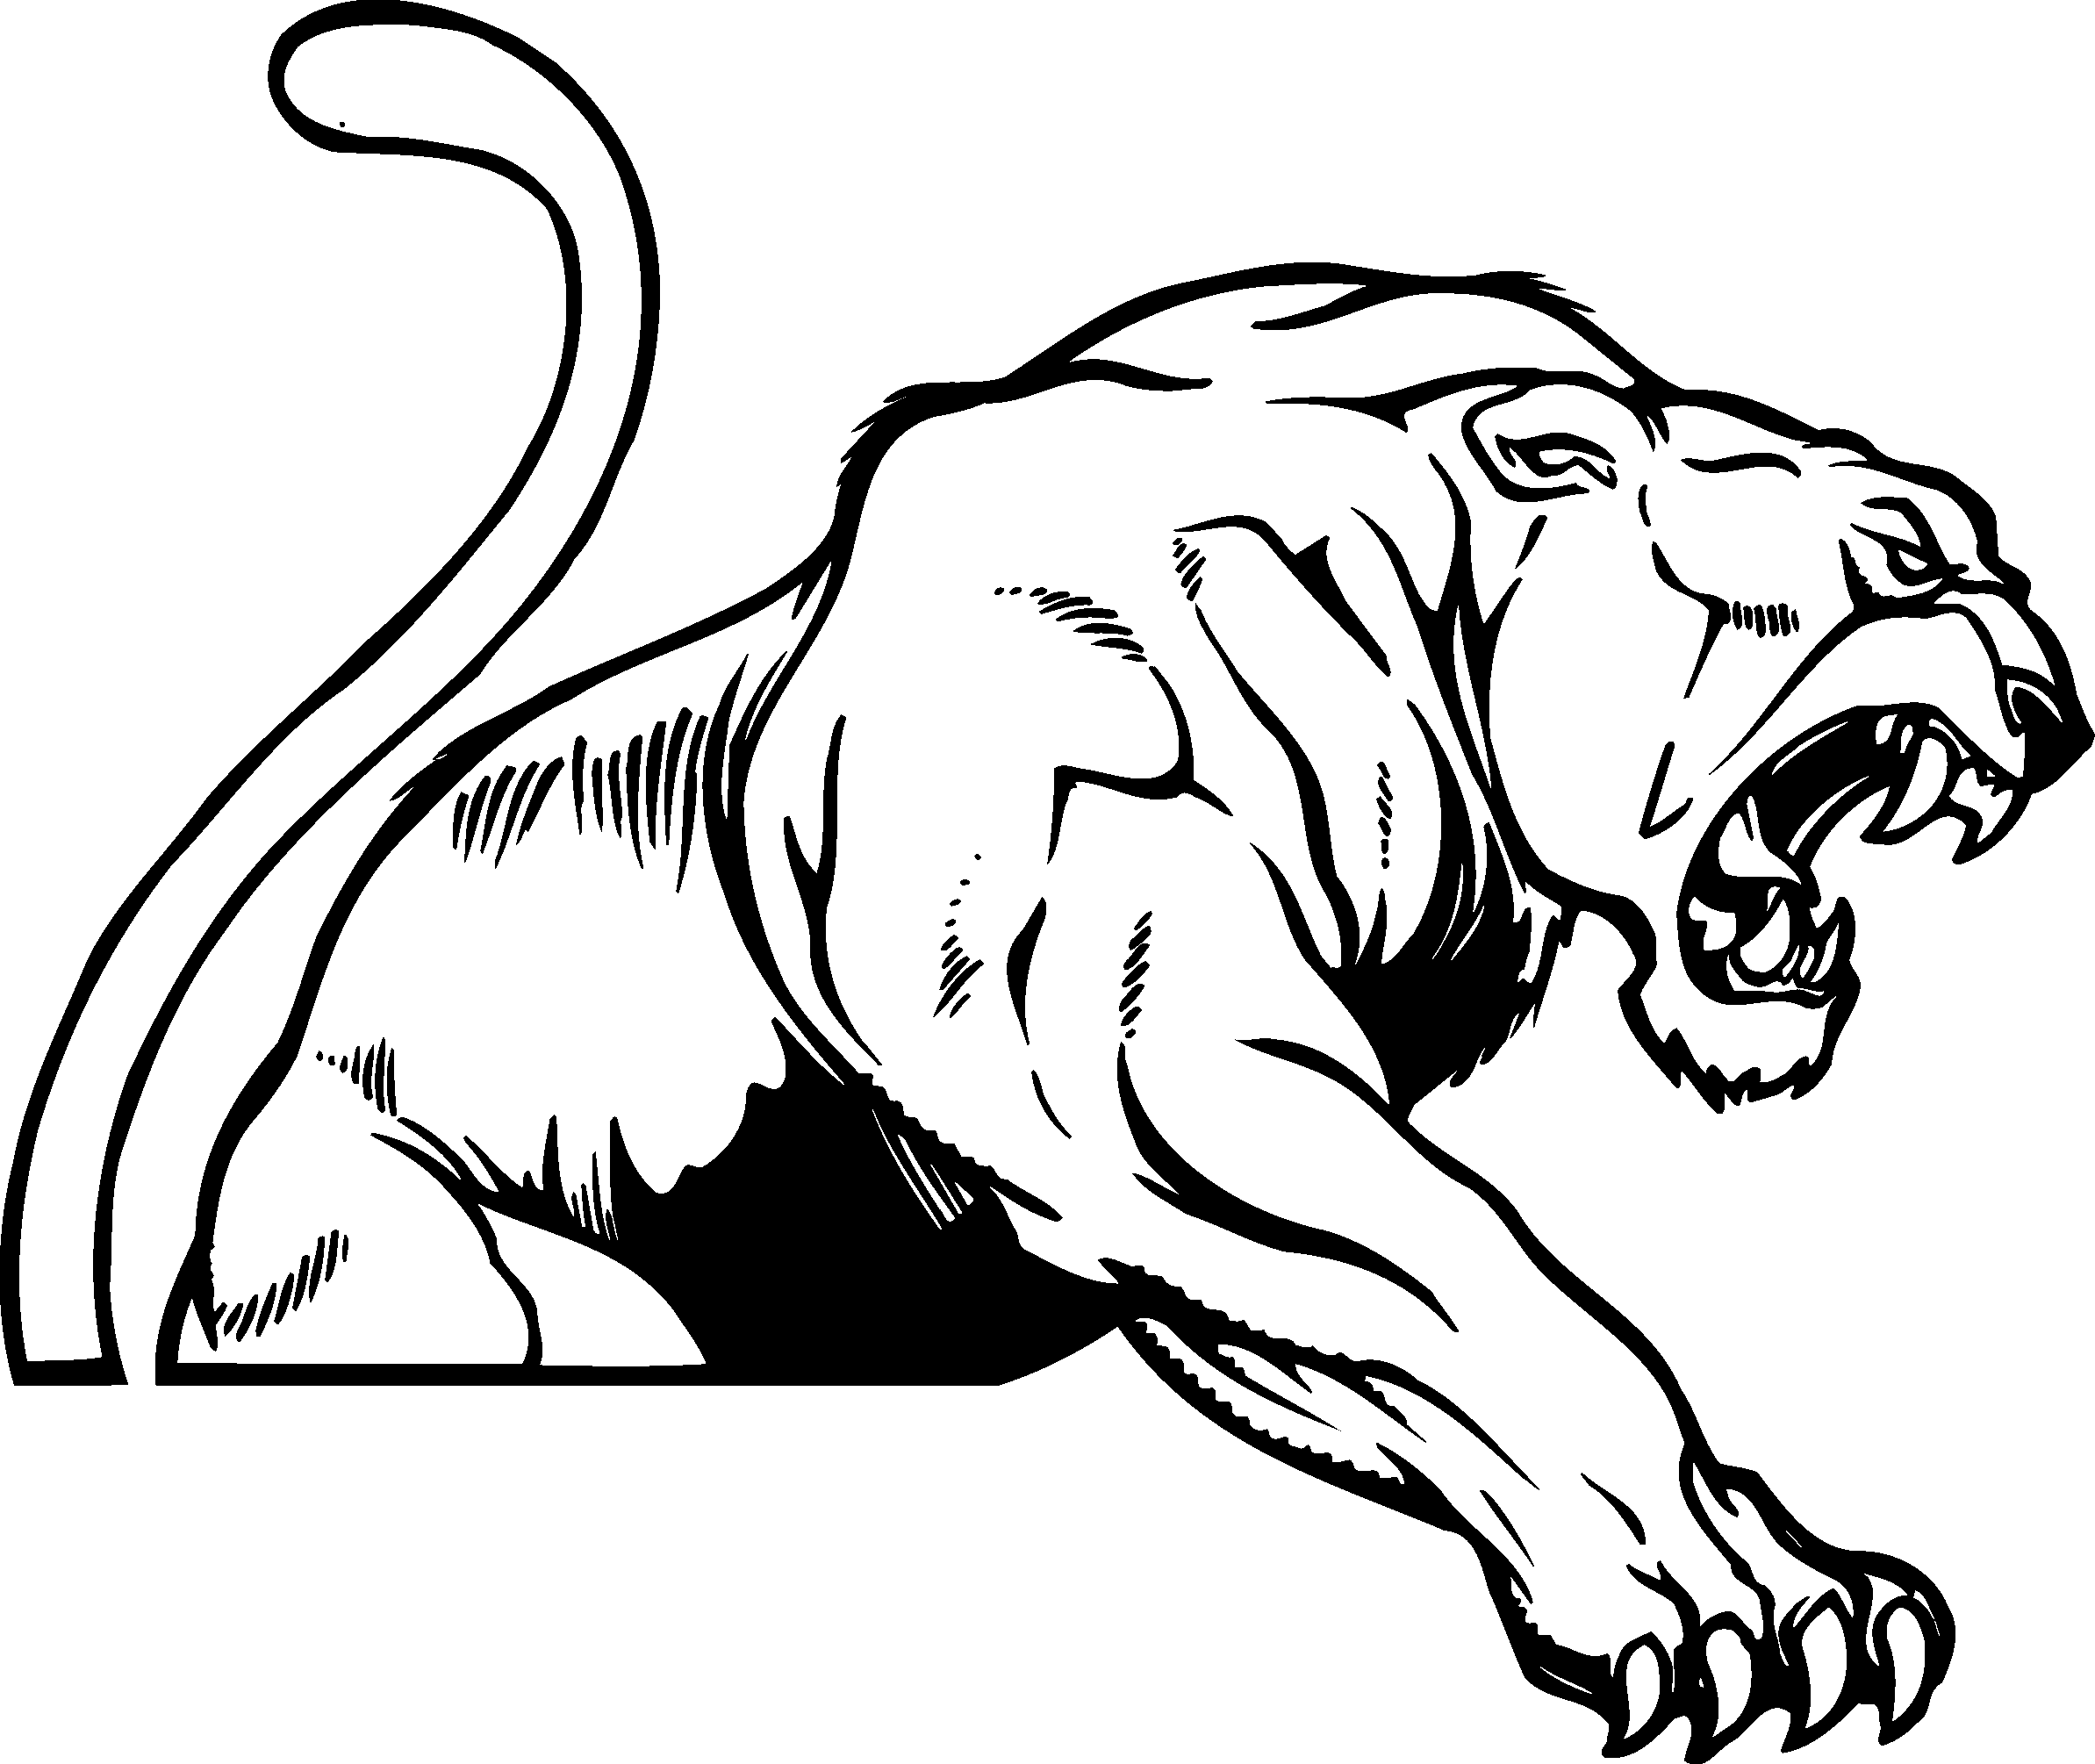 Panther Outline Coloring Pages panther logo bD4qte gif Printable Coloring4free